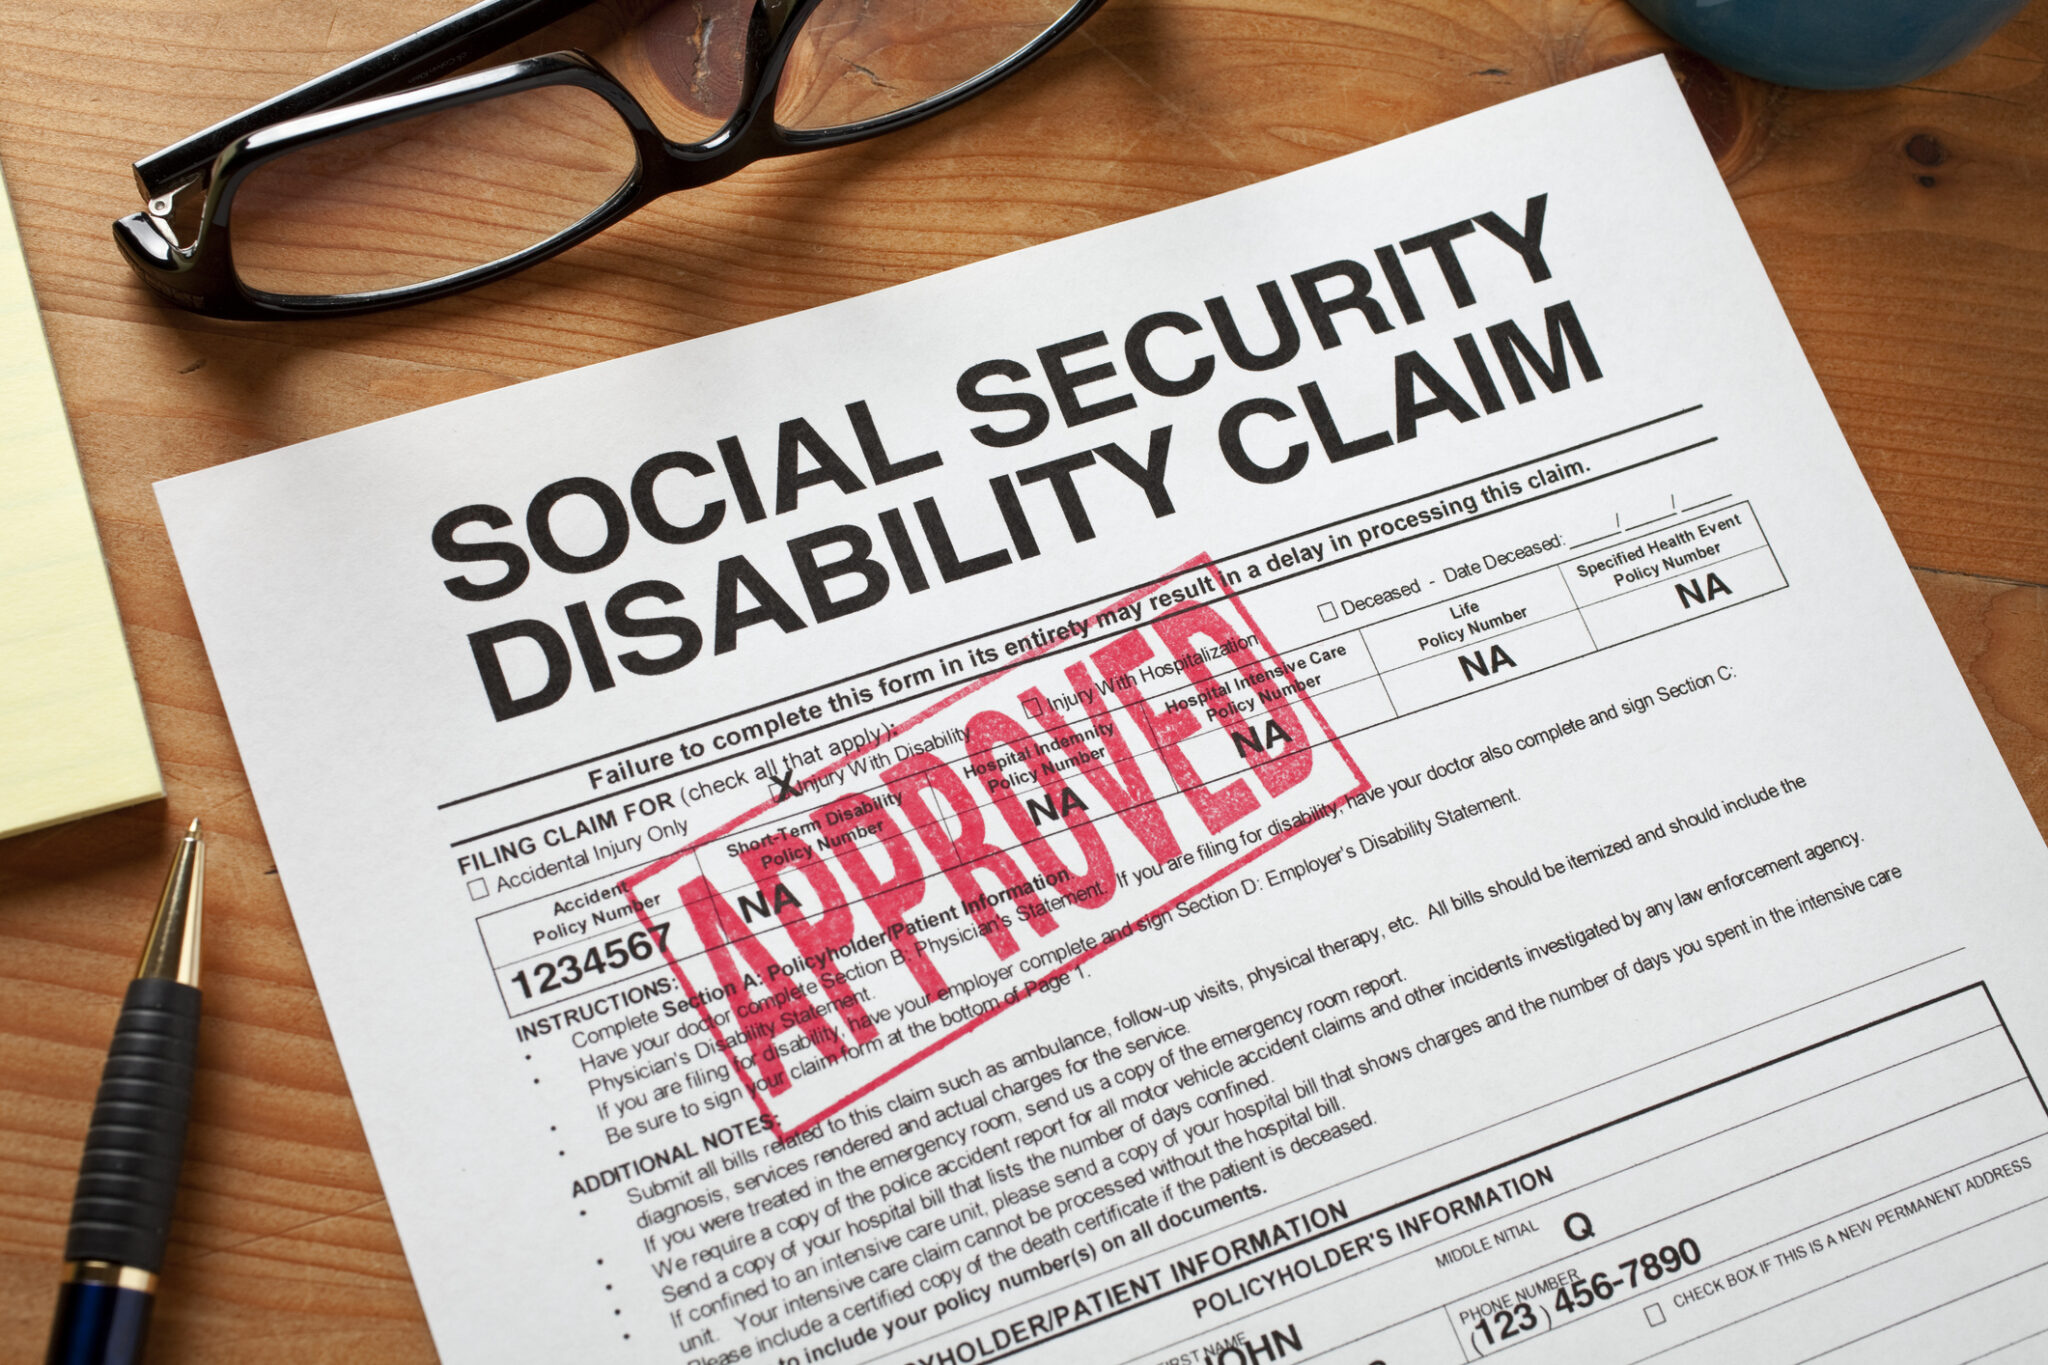 How Long Does It Take To Get Social Security Disability Once Approved?